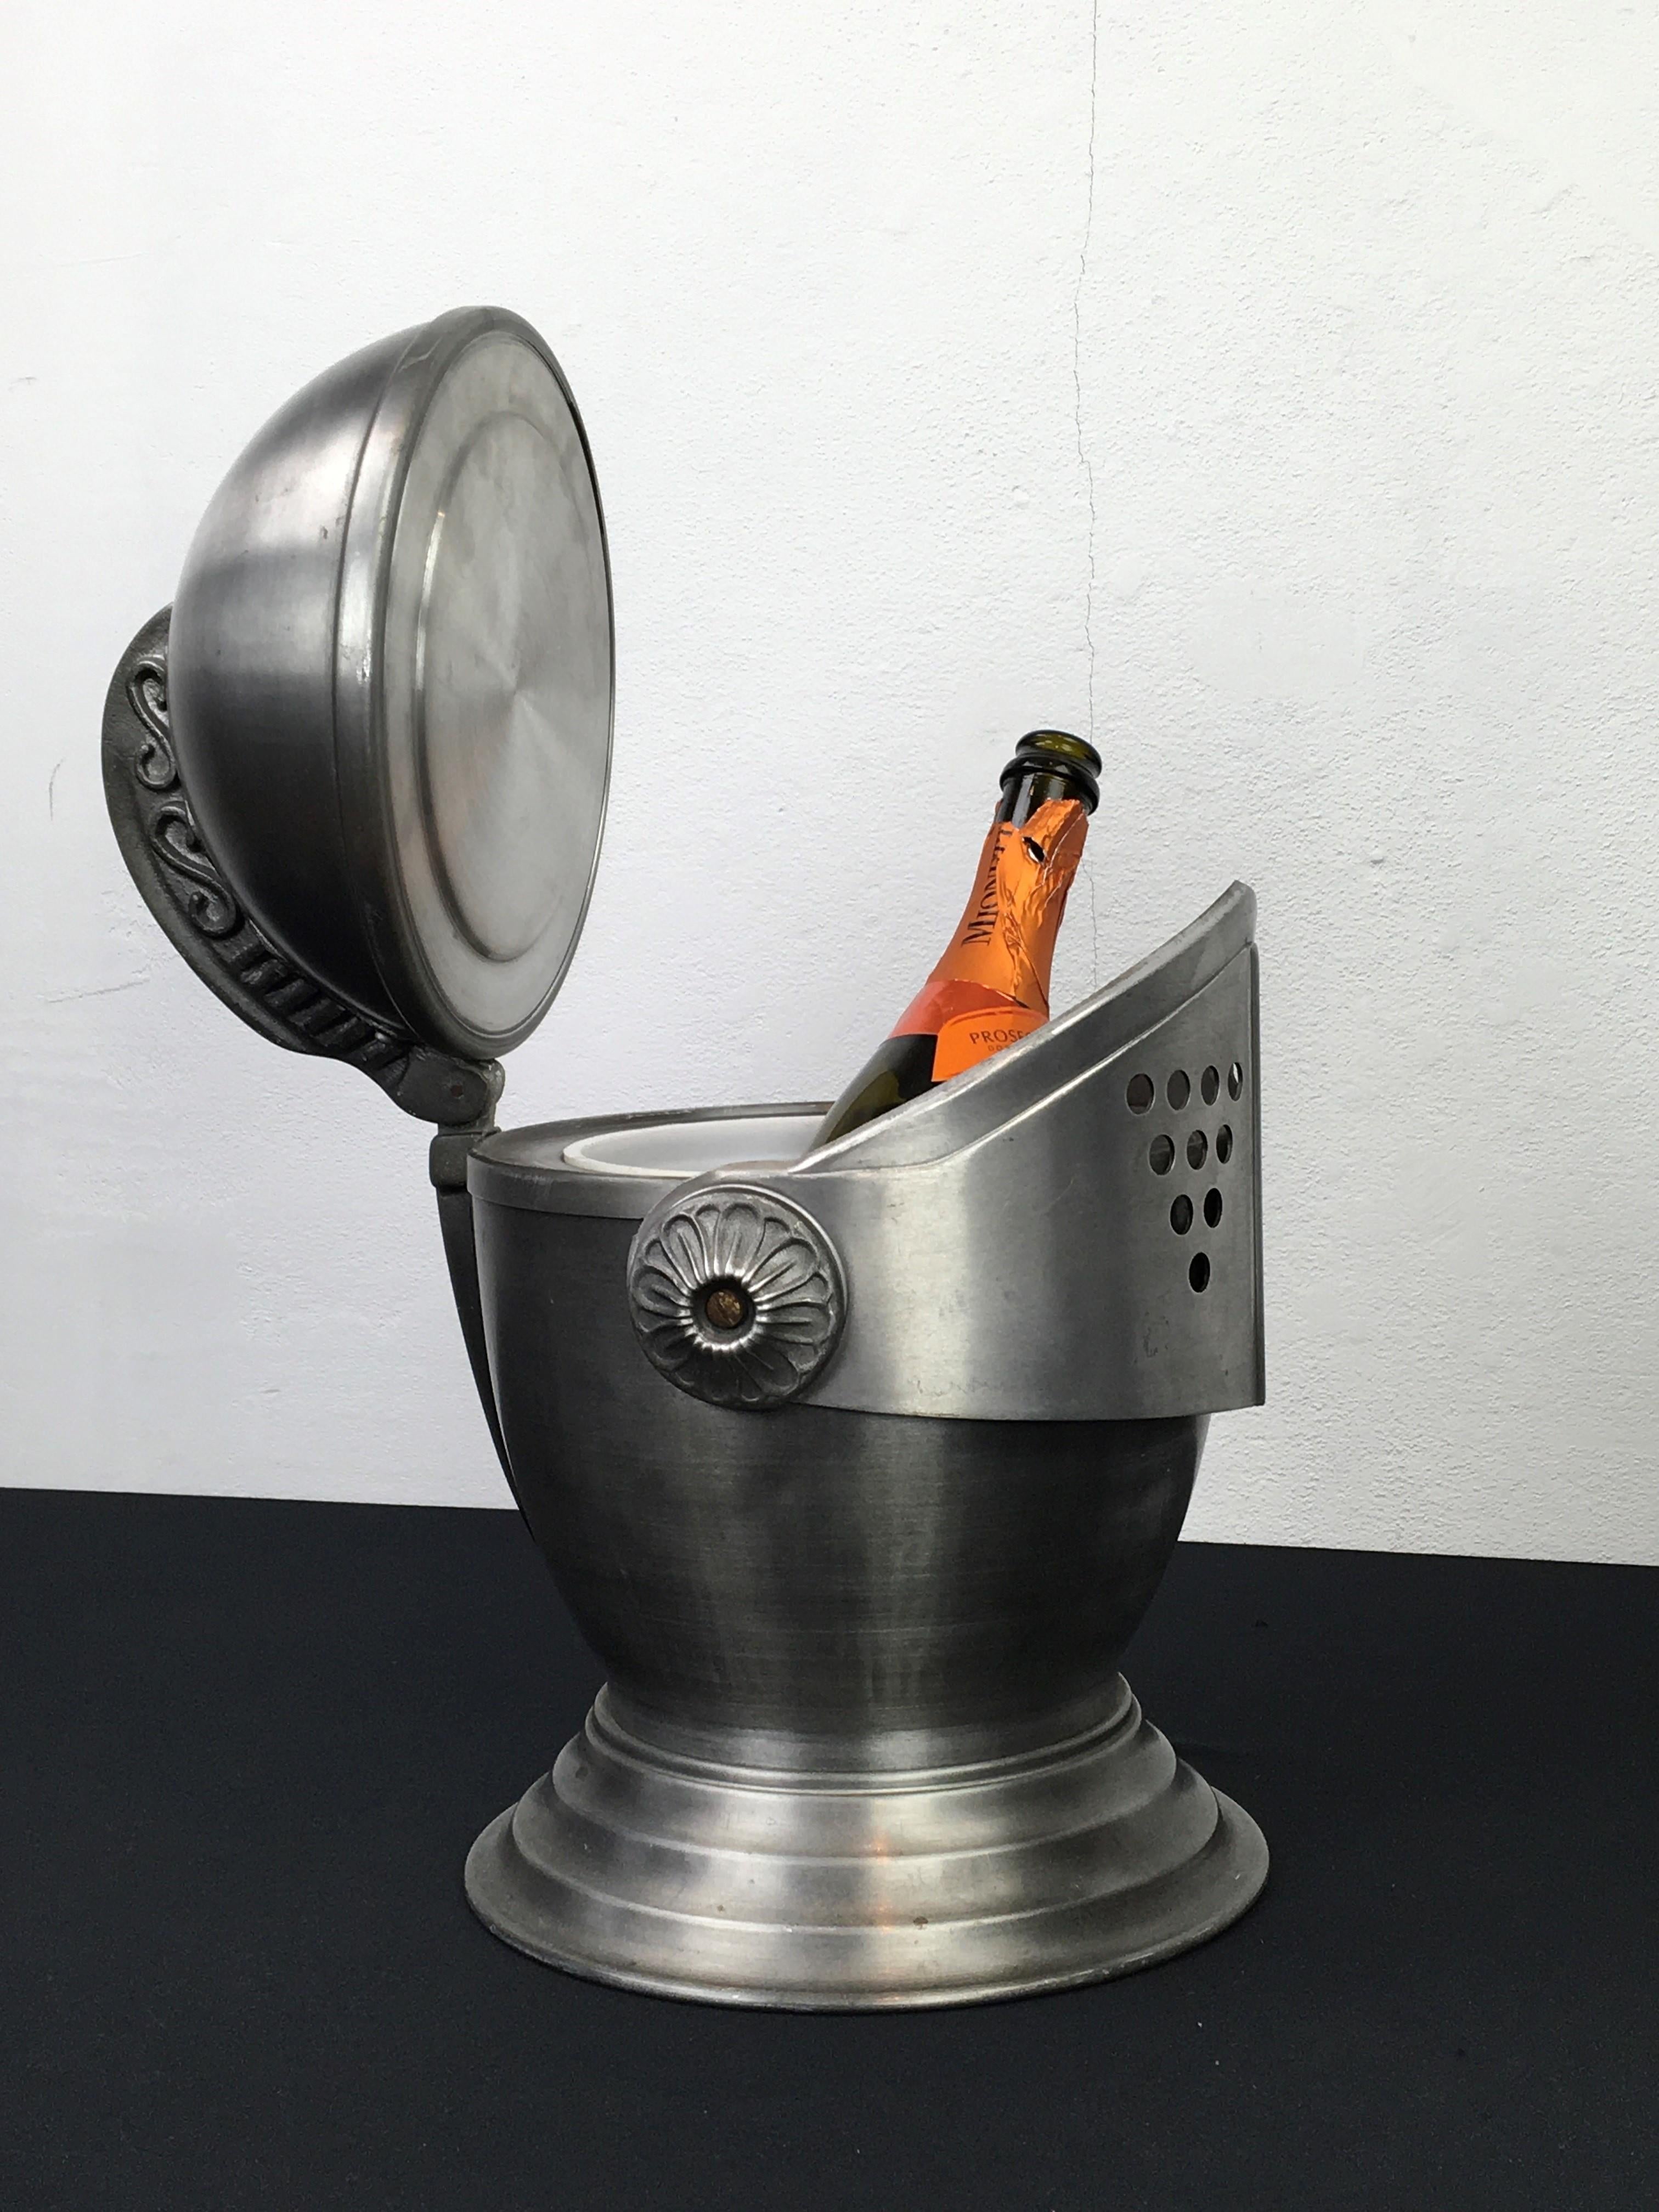 Vintage Knight's helmet ice bucket. 
An ice bucket made of brushed alumiunium in the shape of a helmet of a knight. 
A great looking ice bucket from the 1970s which was made in Hong Kong. 
Can be used as a wine cooler, ice bucket or is great as